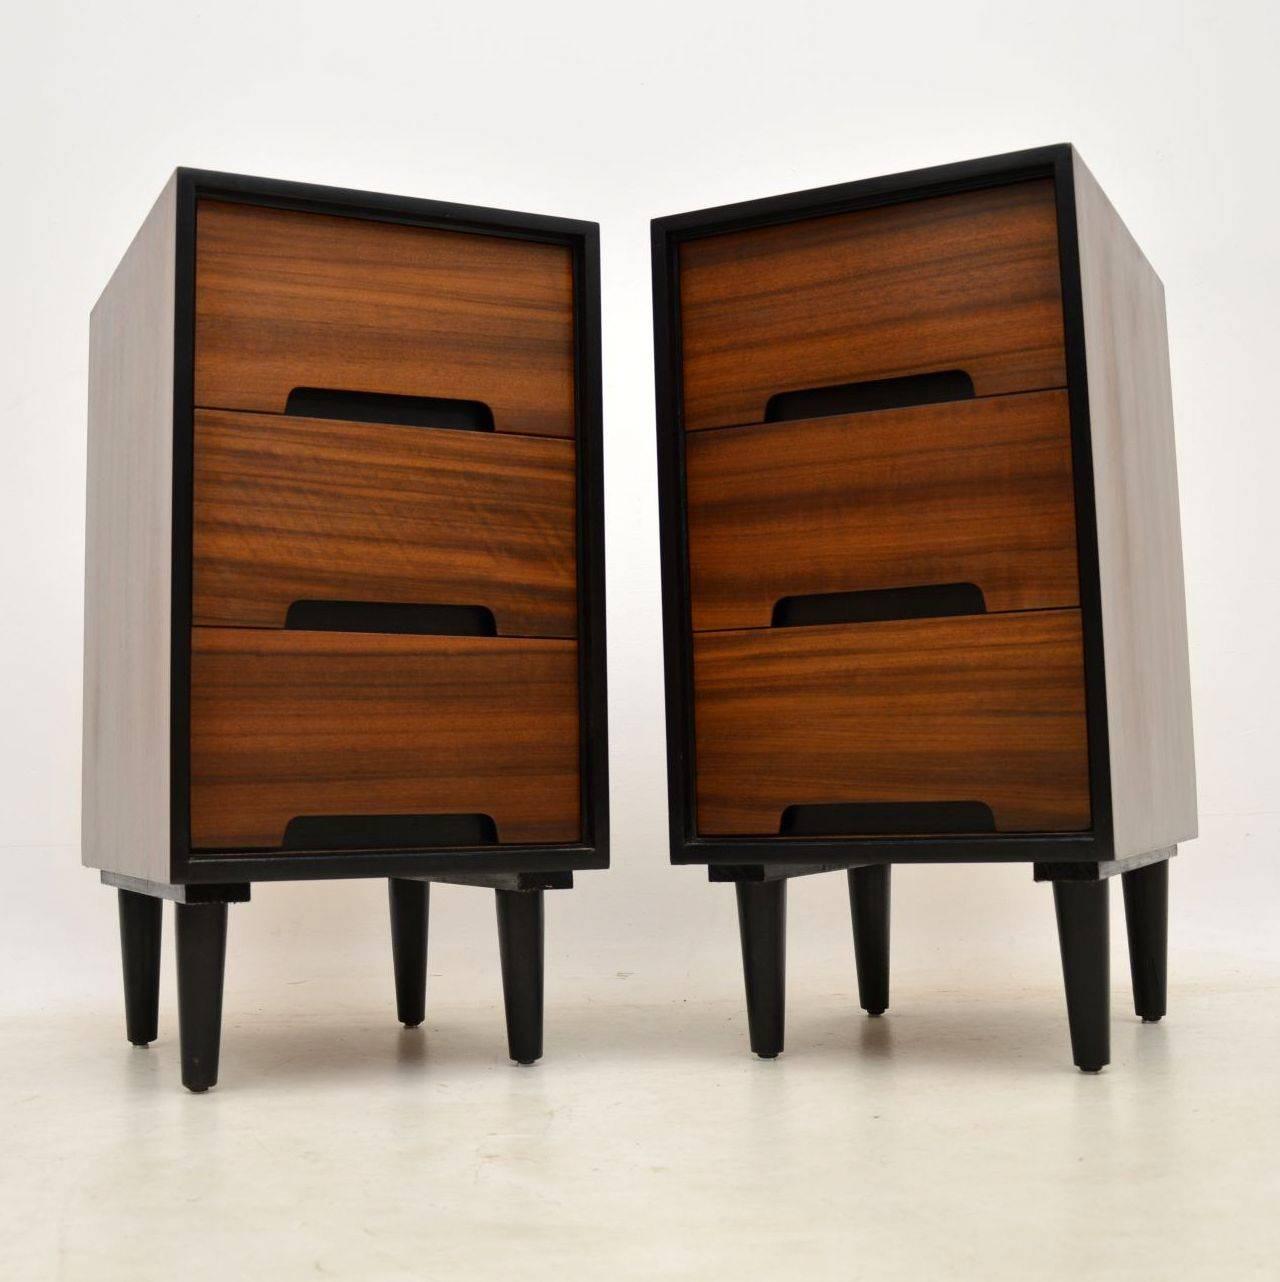 A stylish and practical pair of vintage bedside chests in walnut, these were designed by John & Sylvia Reid for Stag. They date from the 1950s, and they are in superb condition for their age, we have had them fully stripped and re-polished to a very